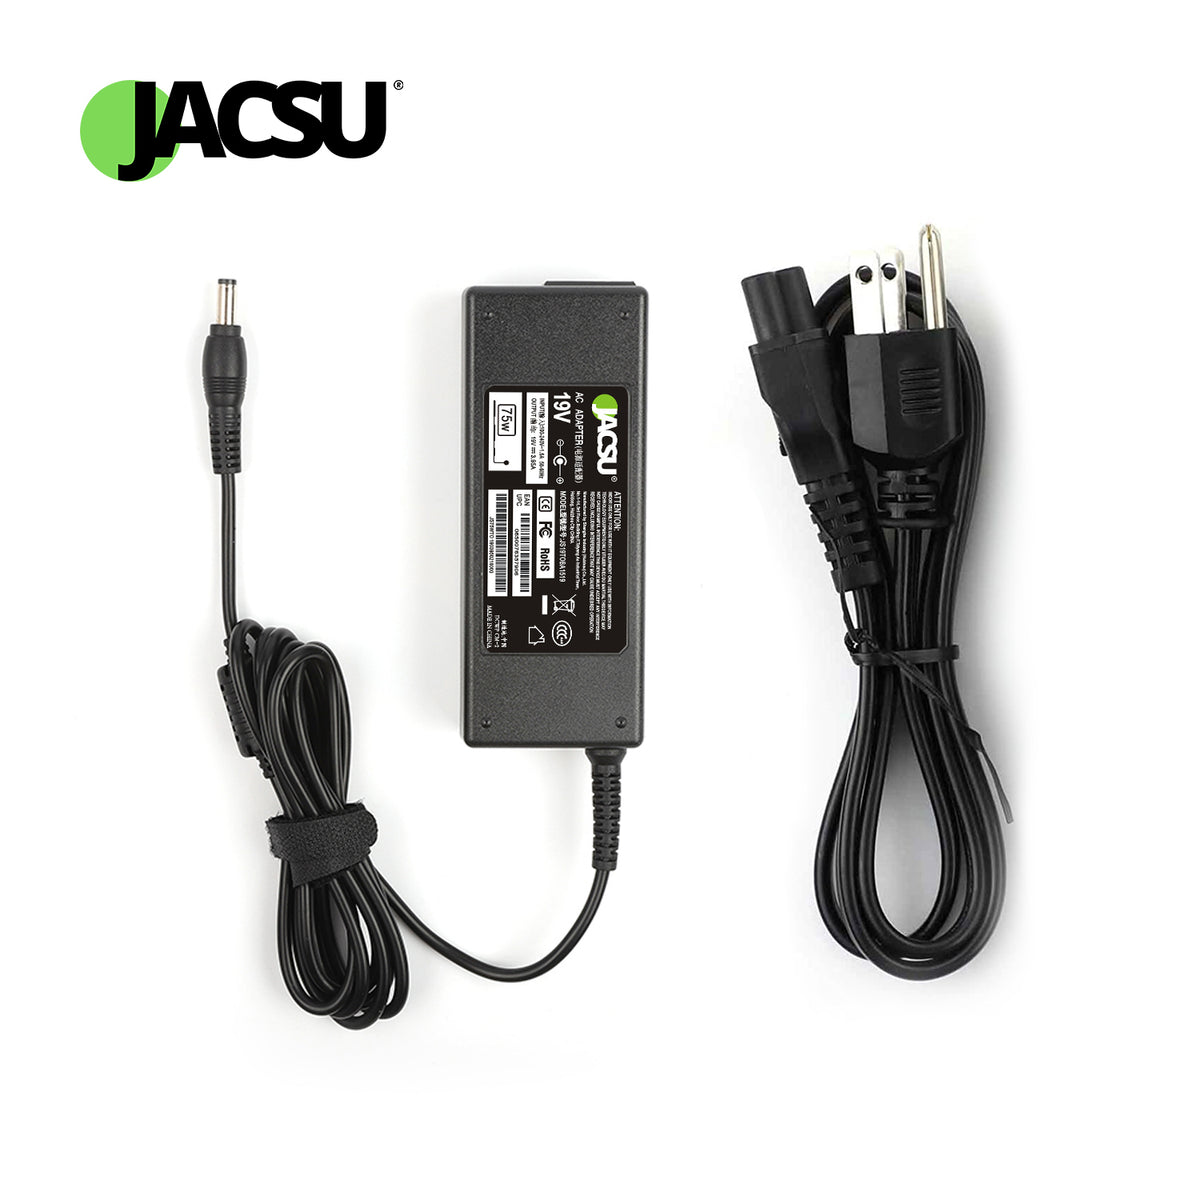 Jacsu 19V 3.95A PIN 5.5X2.5 75 W Laptop Adapter/Charger For Toshiba Mini NB100 Satellite C55DT-A C70D-B By